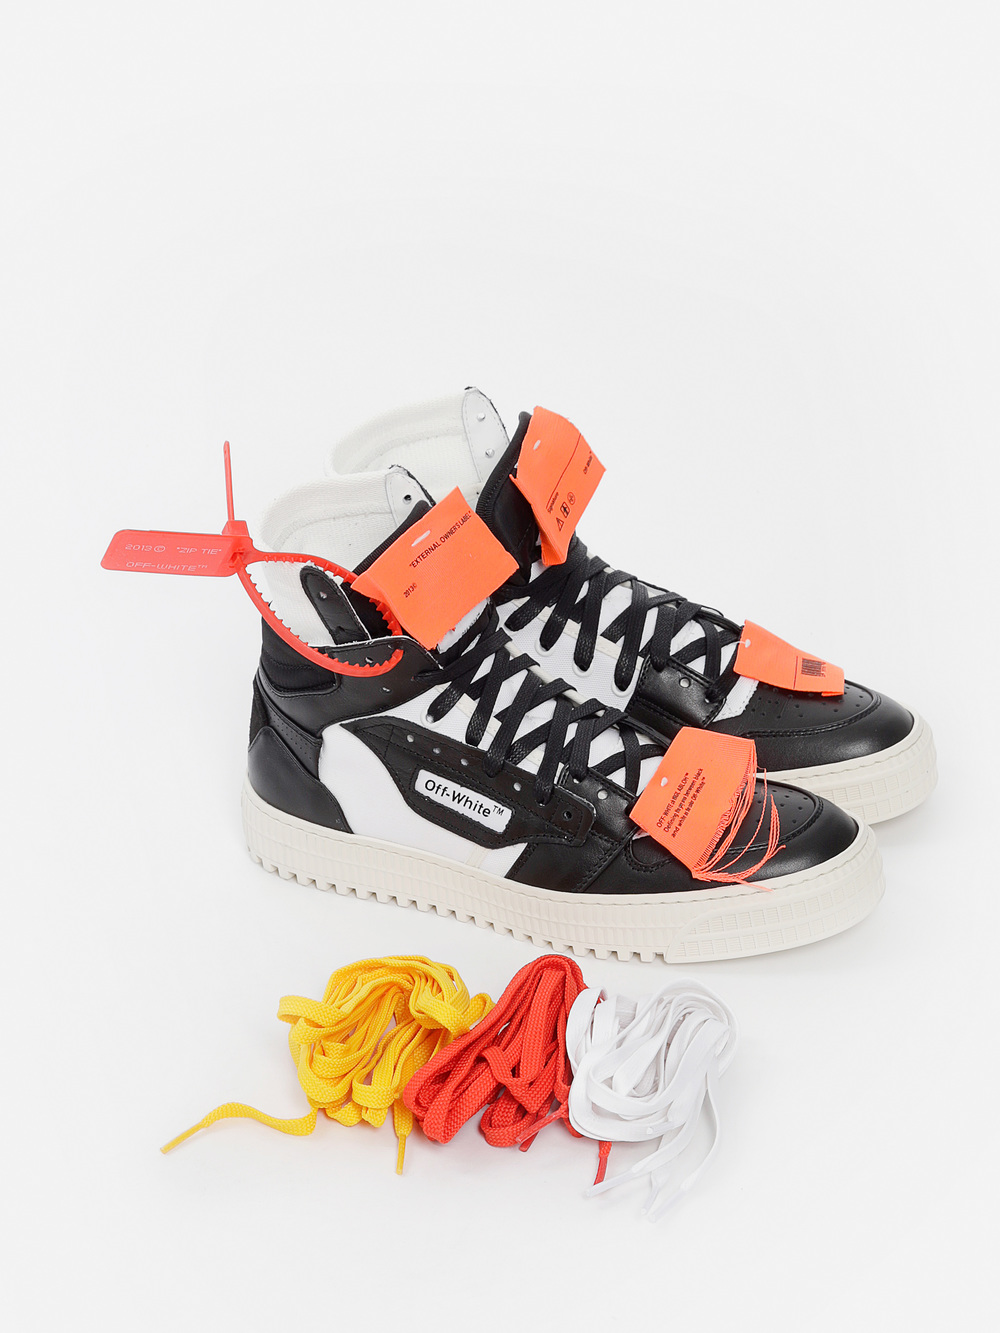 Look at OFF-WHITE C/O VIRGIL ABLOH’s Black and White Low 3.0 Sneakers